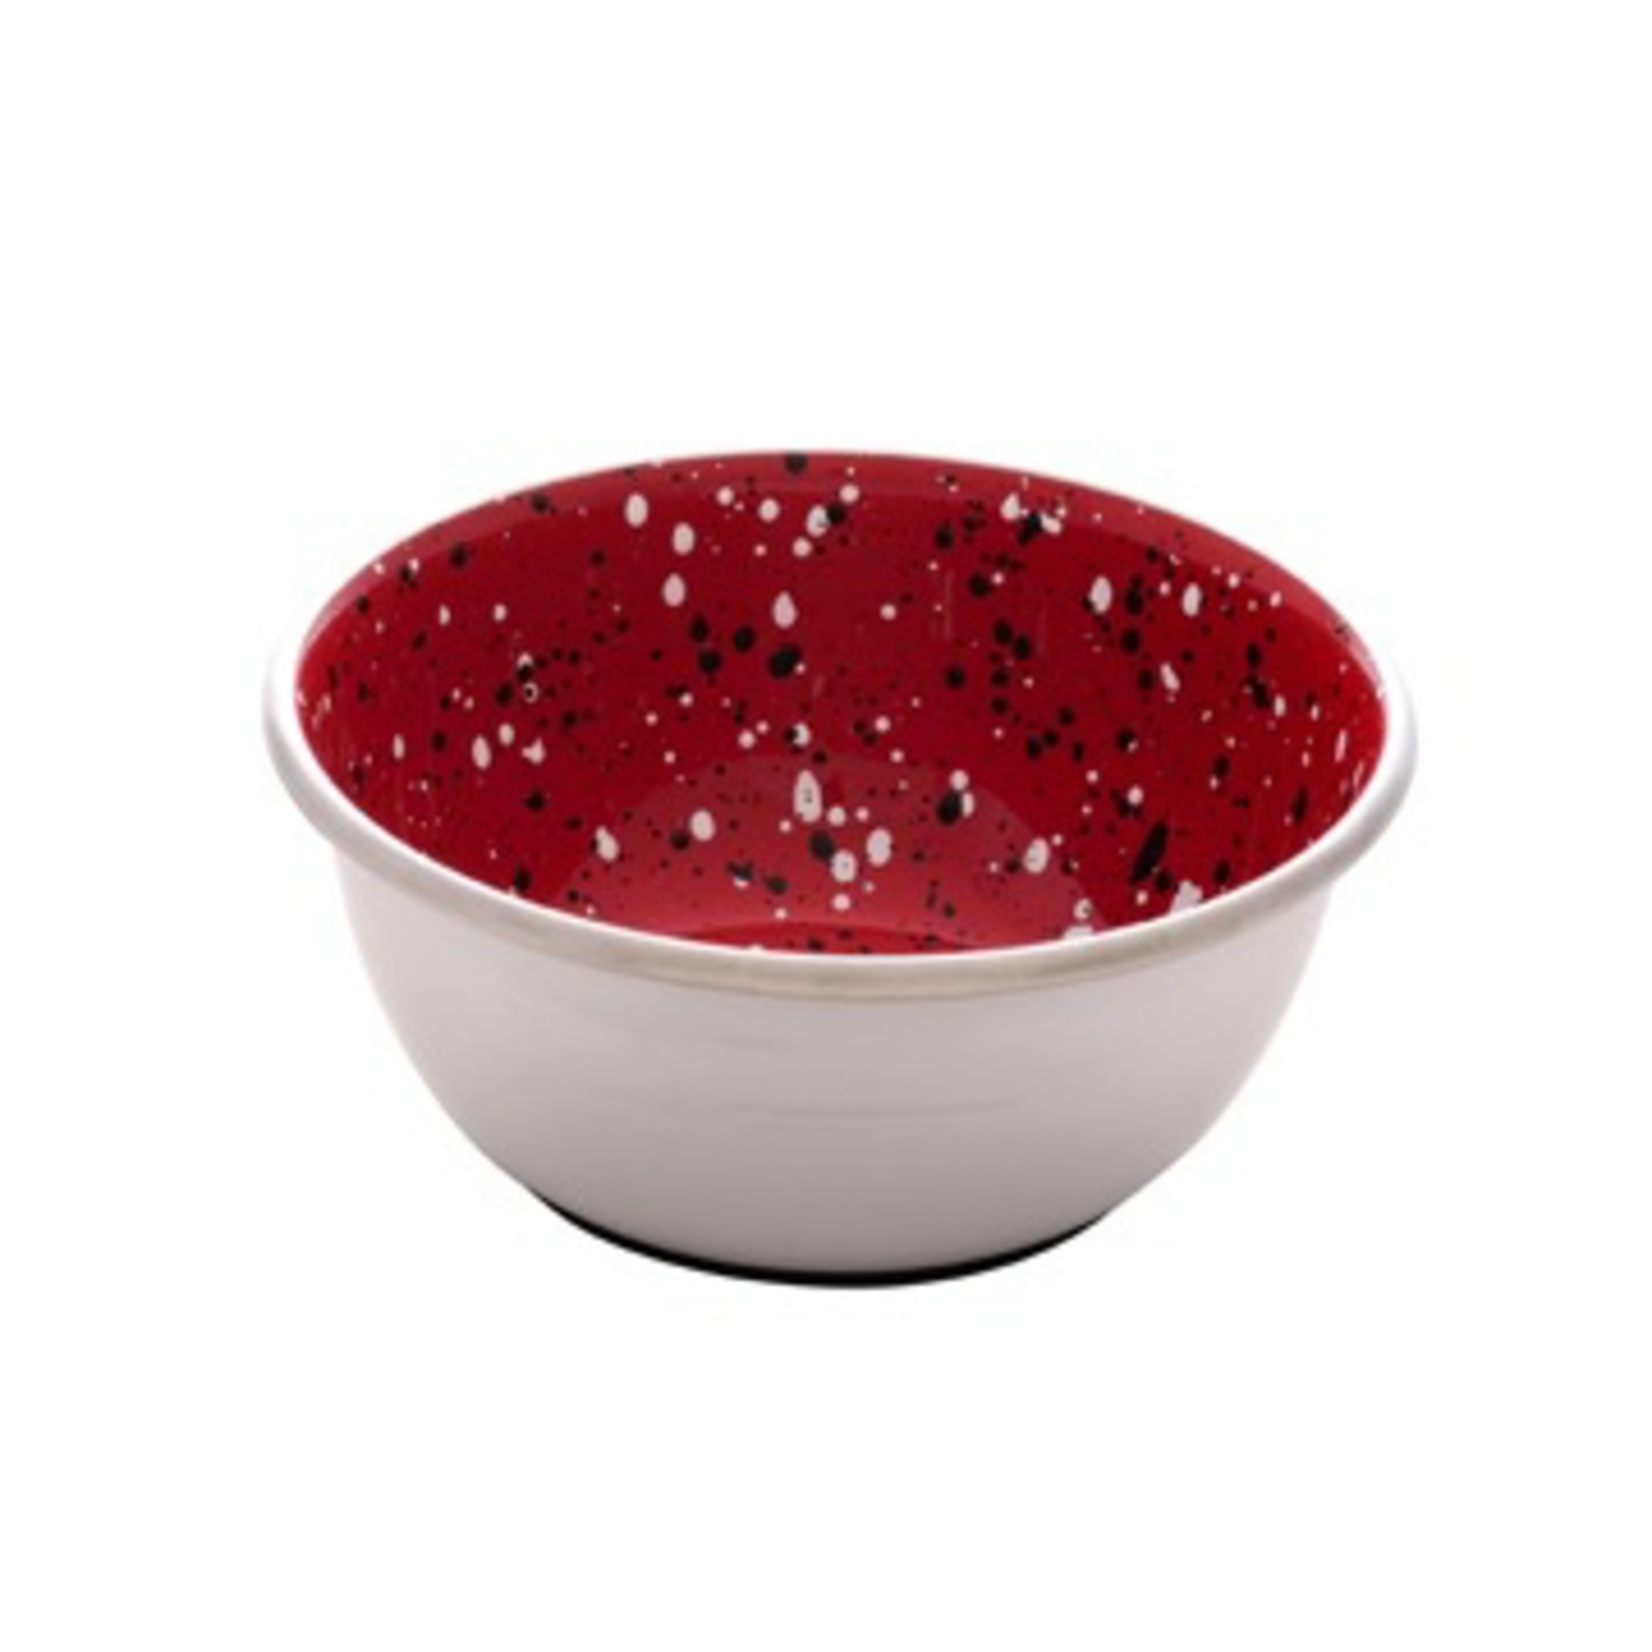 DOG IT (W) Dogit Stainless Steel Non-Skid Dog Bowl - Red Speckle - 500 ml (17 fl.oz.)